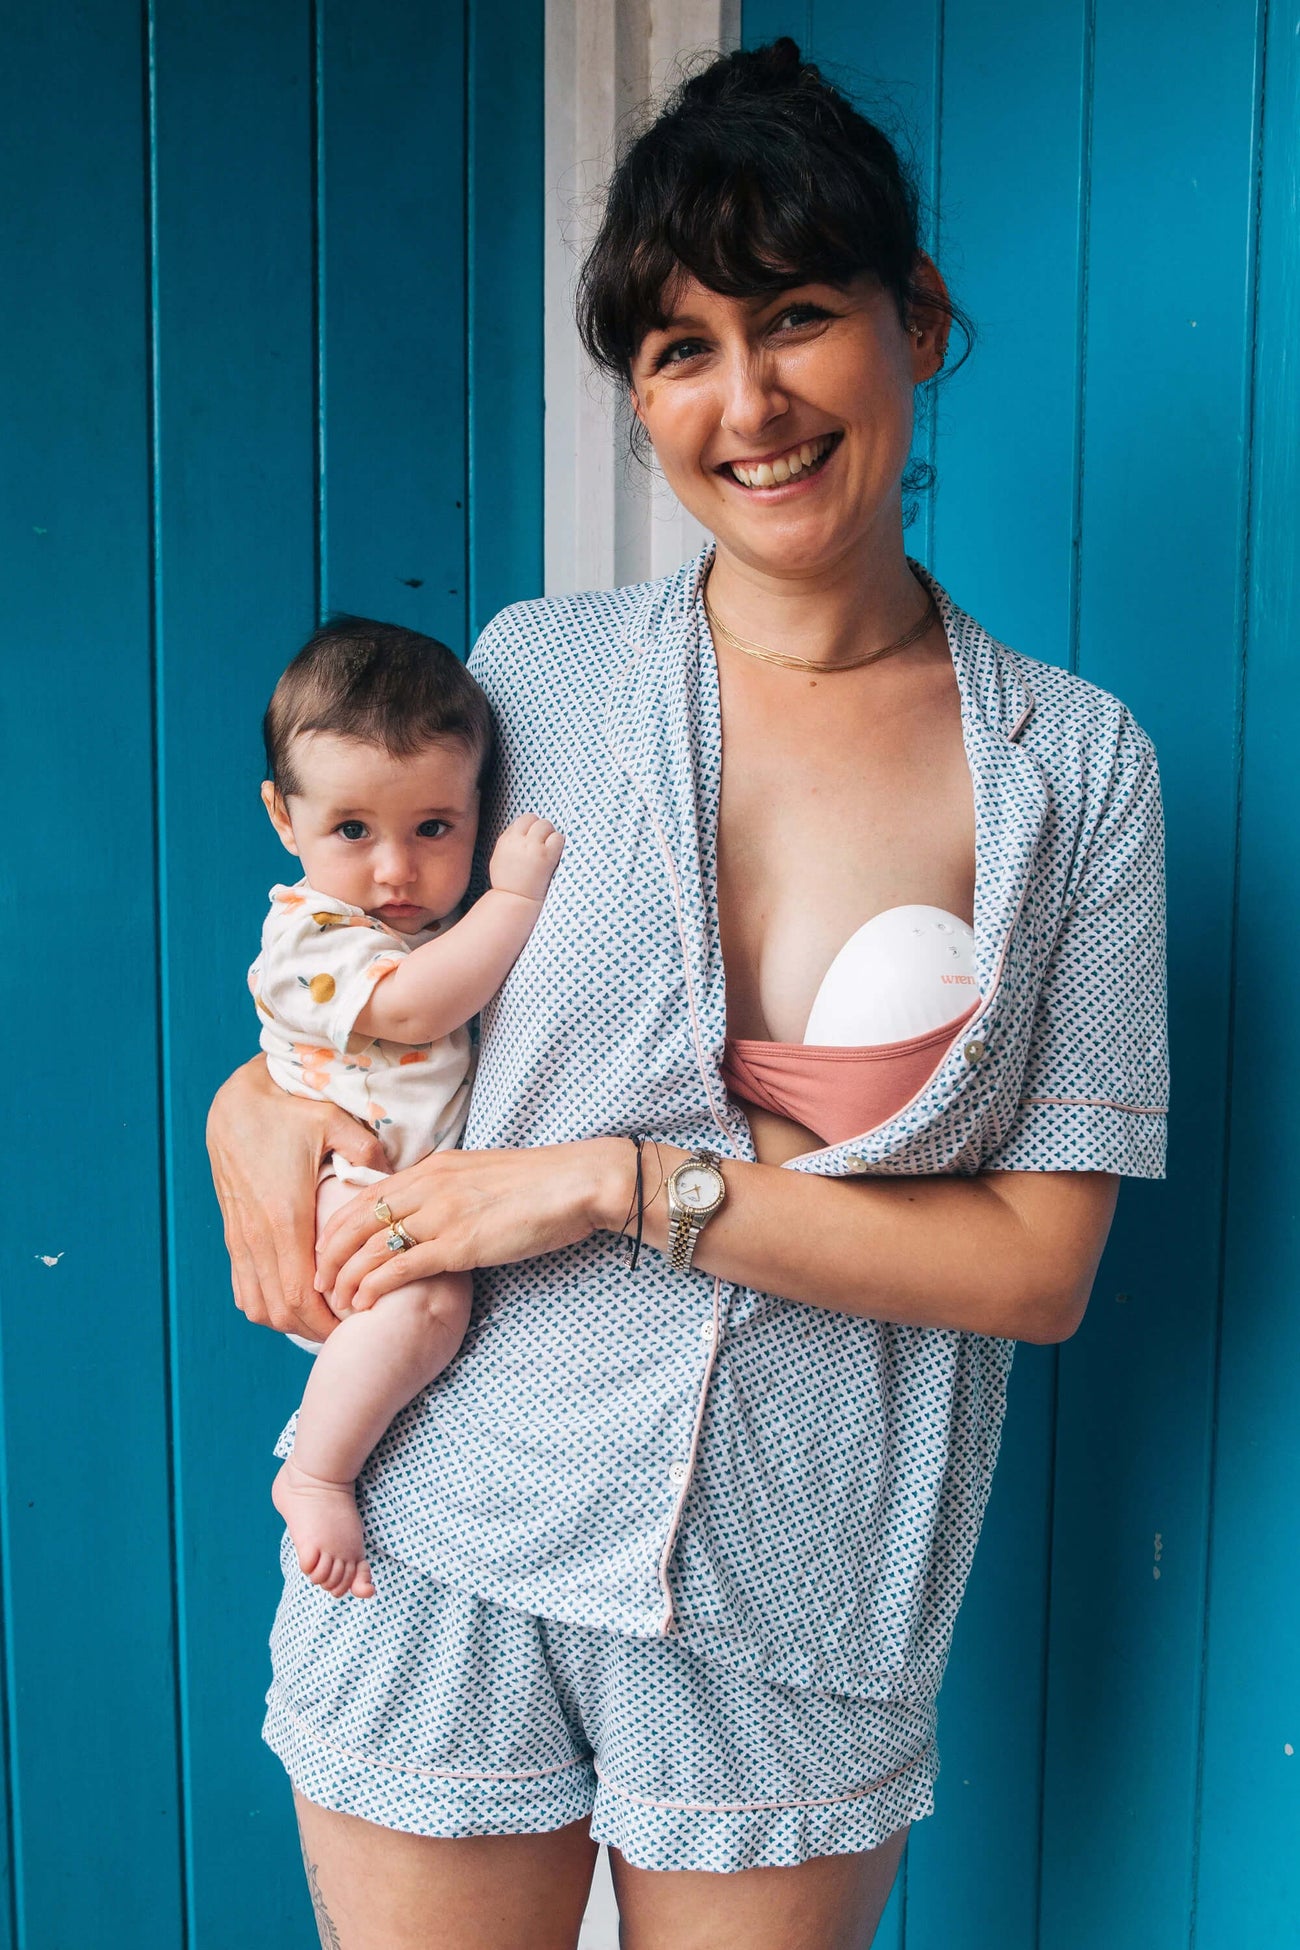 Woman wearing a Wren Hands Free Breast Pump, standing up holding her baby